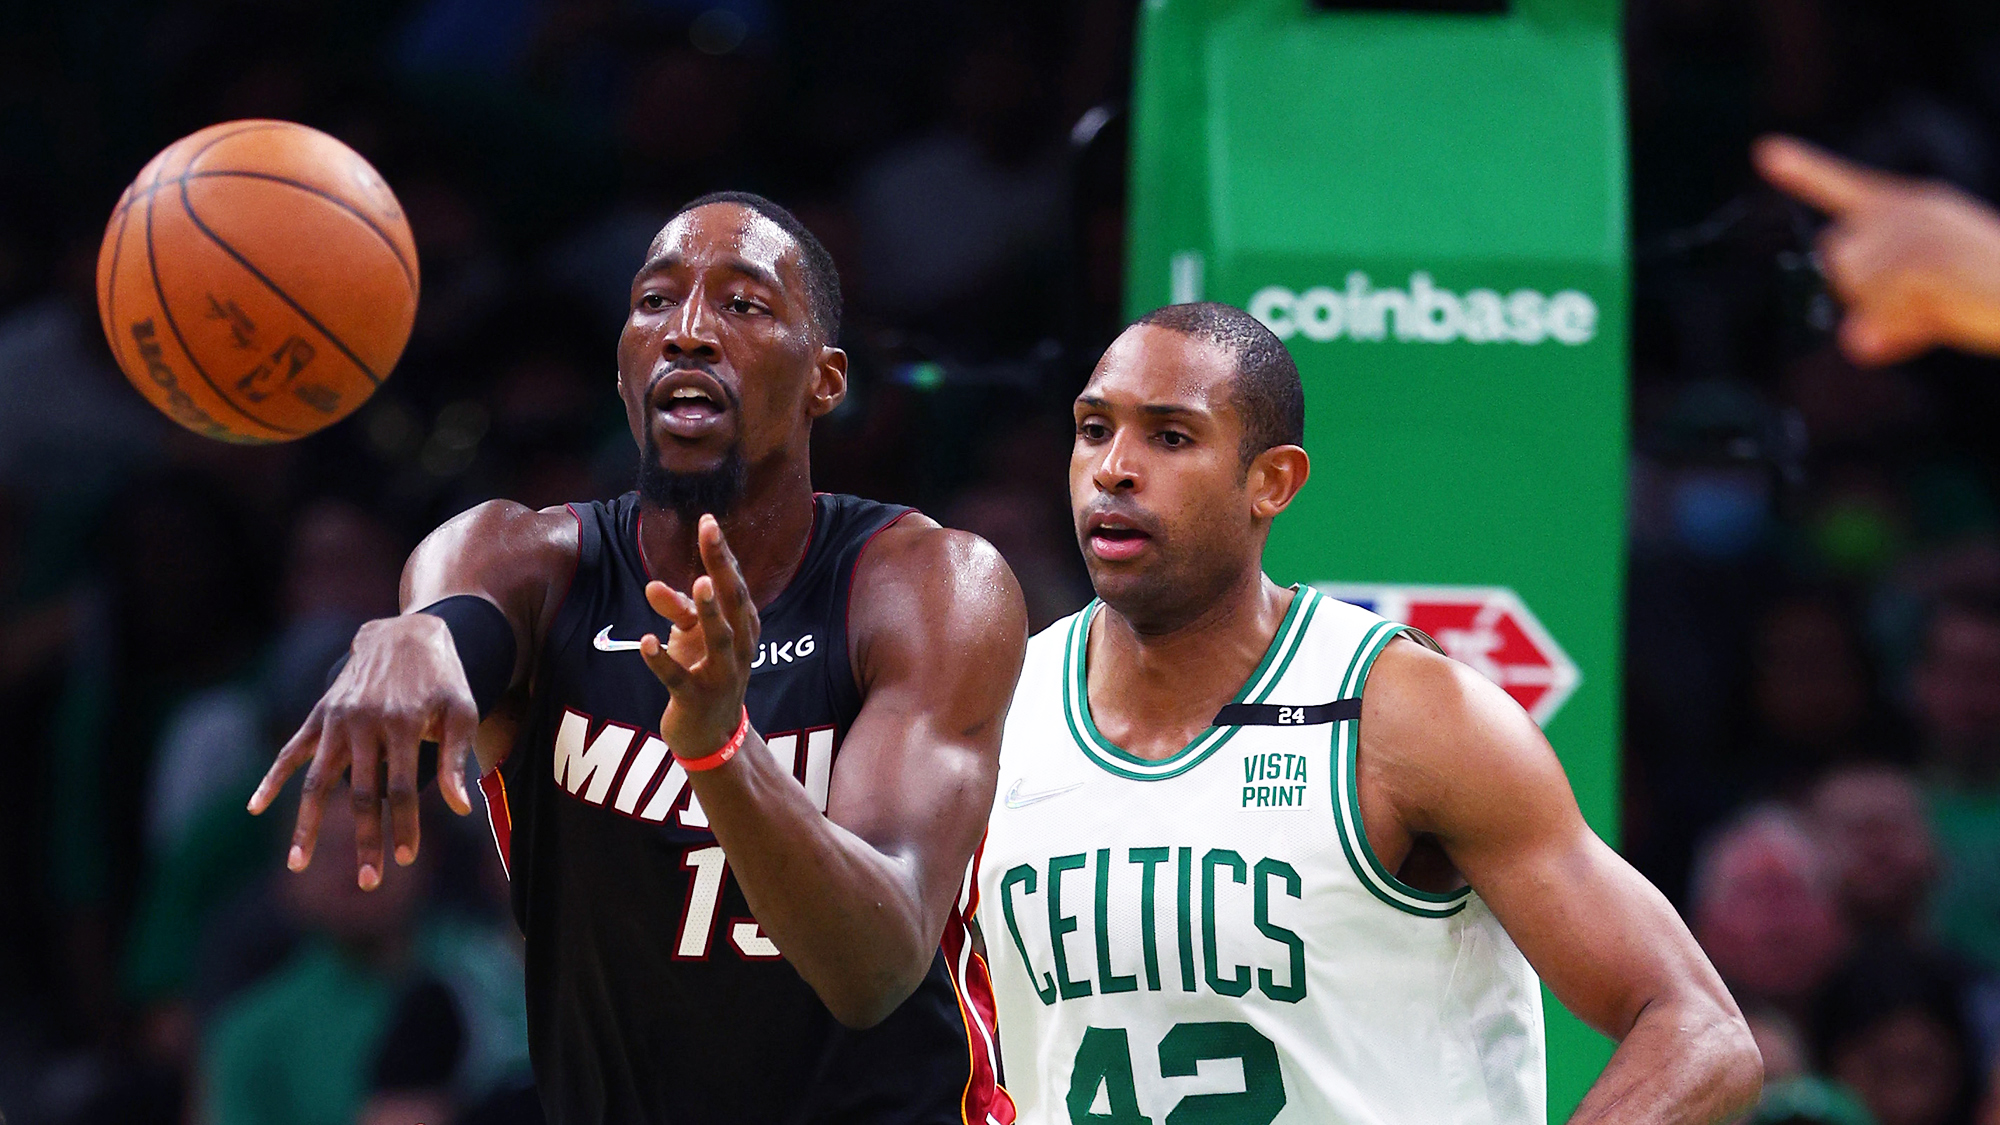 Heat vs Celtics live stream: How to watch game 4 of NBA Playoffs Eastern Conference Finals online right now